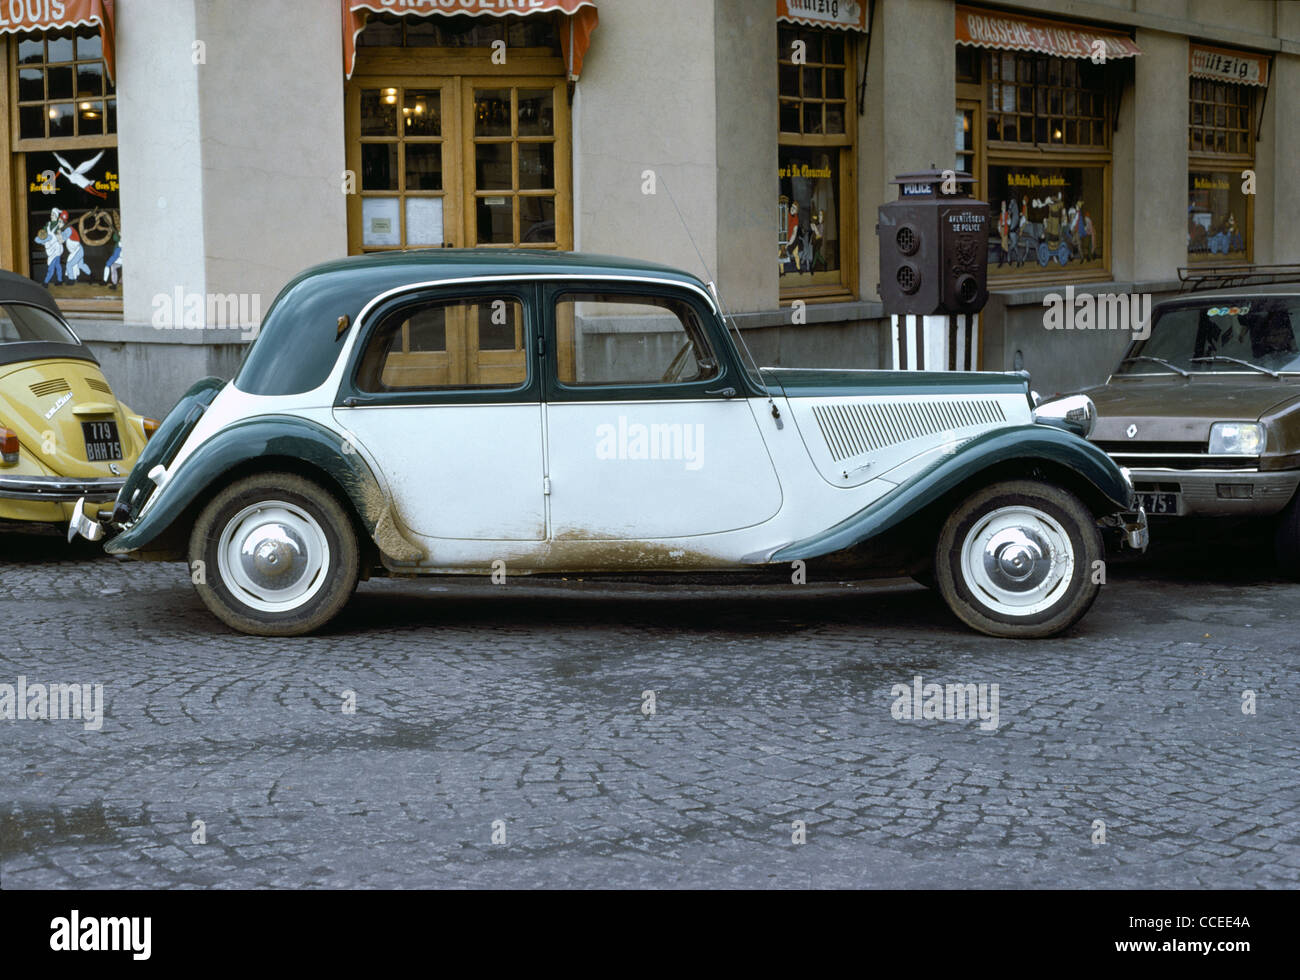 A classic Citroen 11b motor car of the fifties in fine restored condition seen double-parked in a Paris Street. Stock Photo